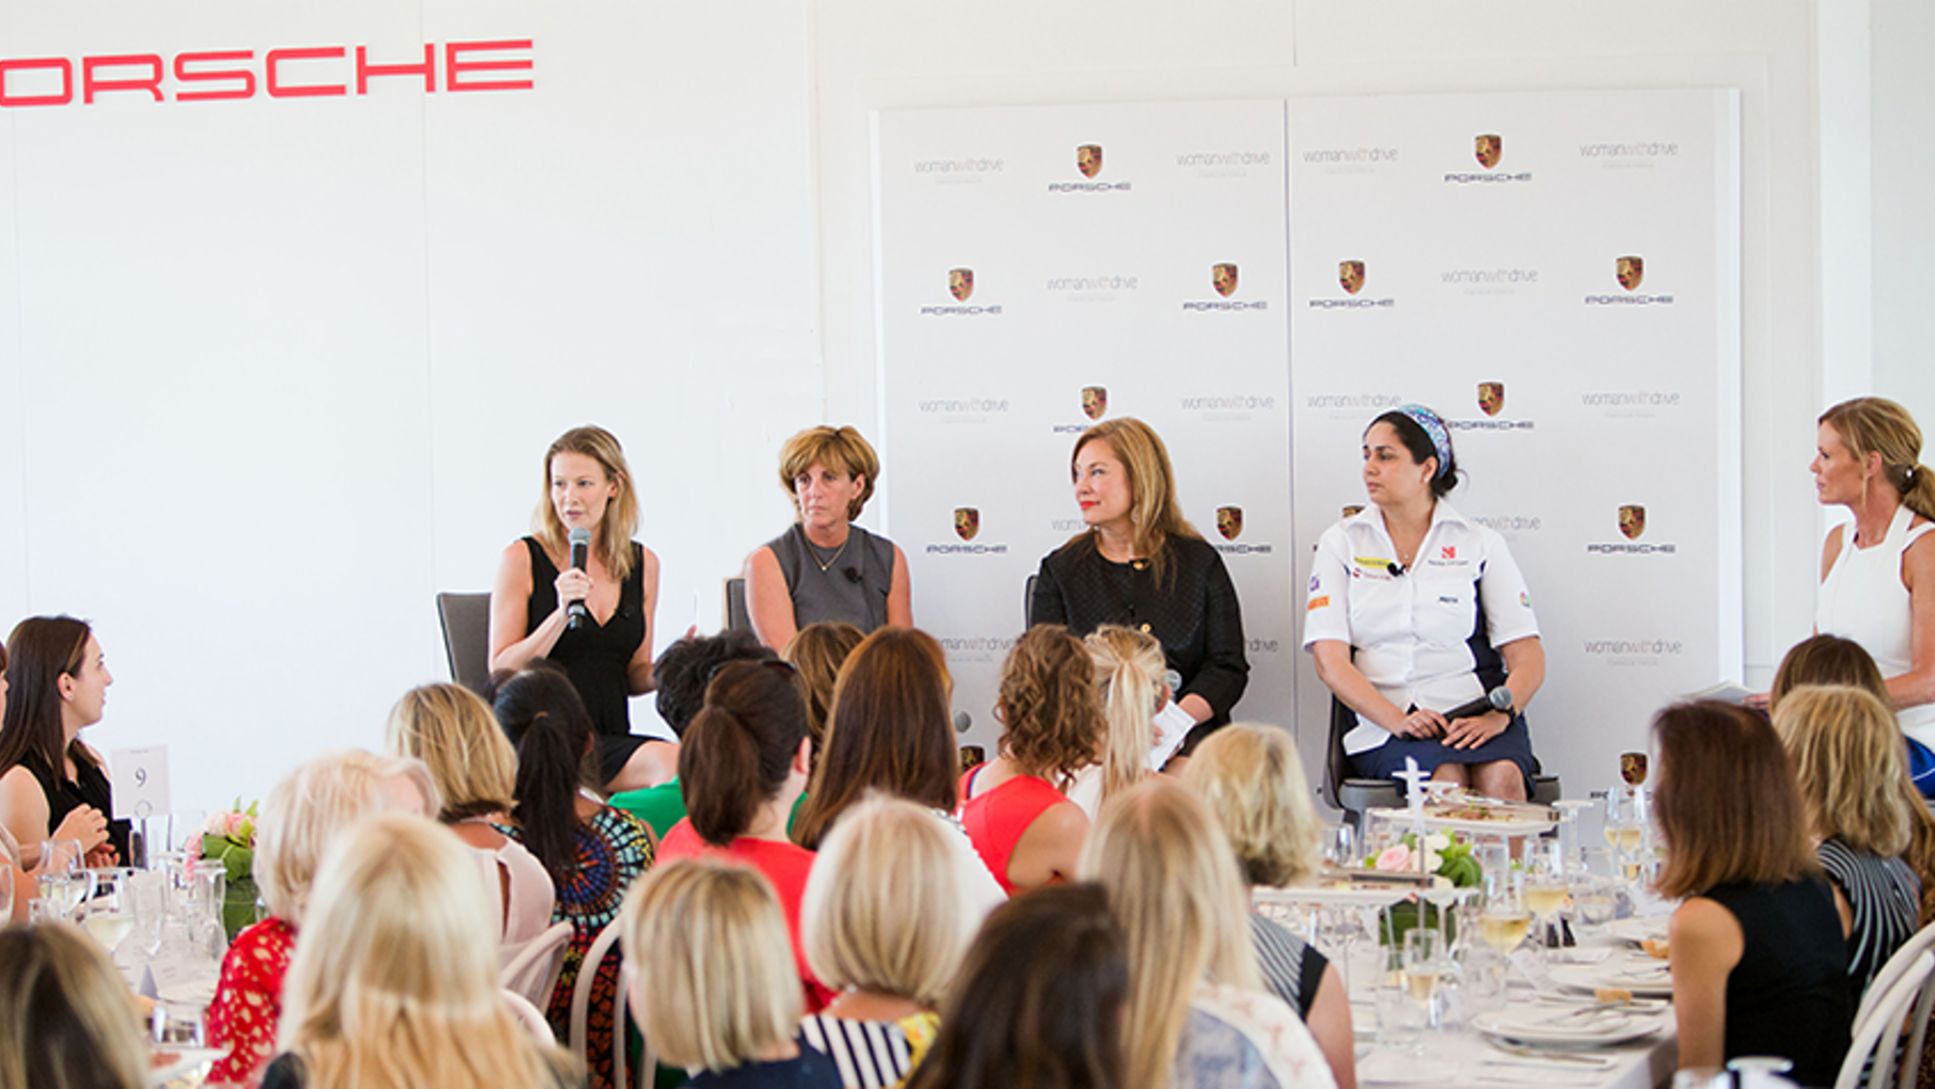 (From left to right: Jennie Gow, Ann Neal, Laura Anderson, Monisha Kaltenborn and Sonia Kruger)